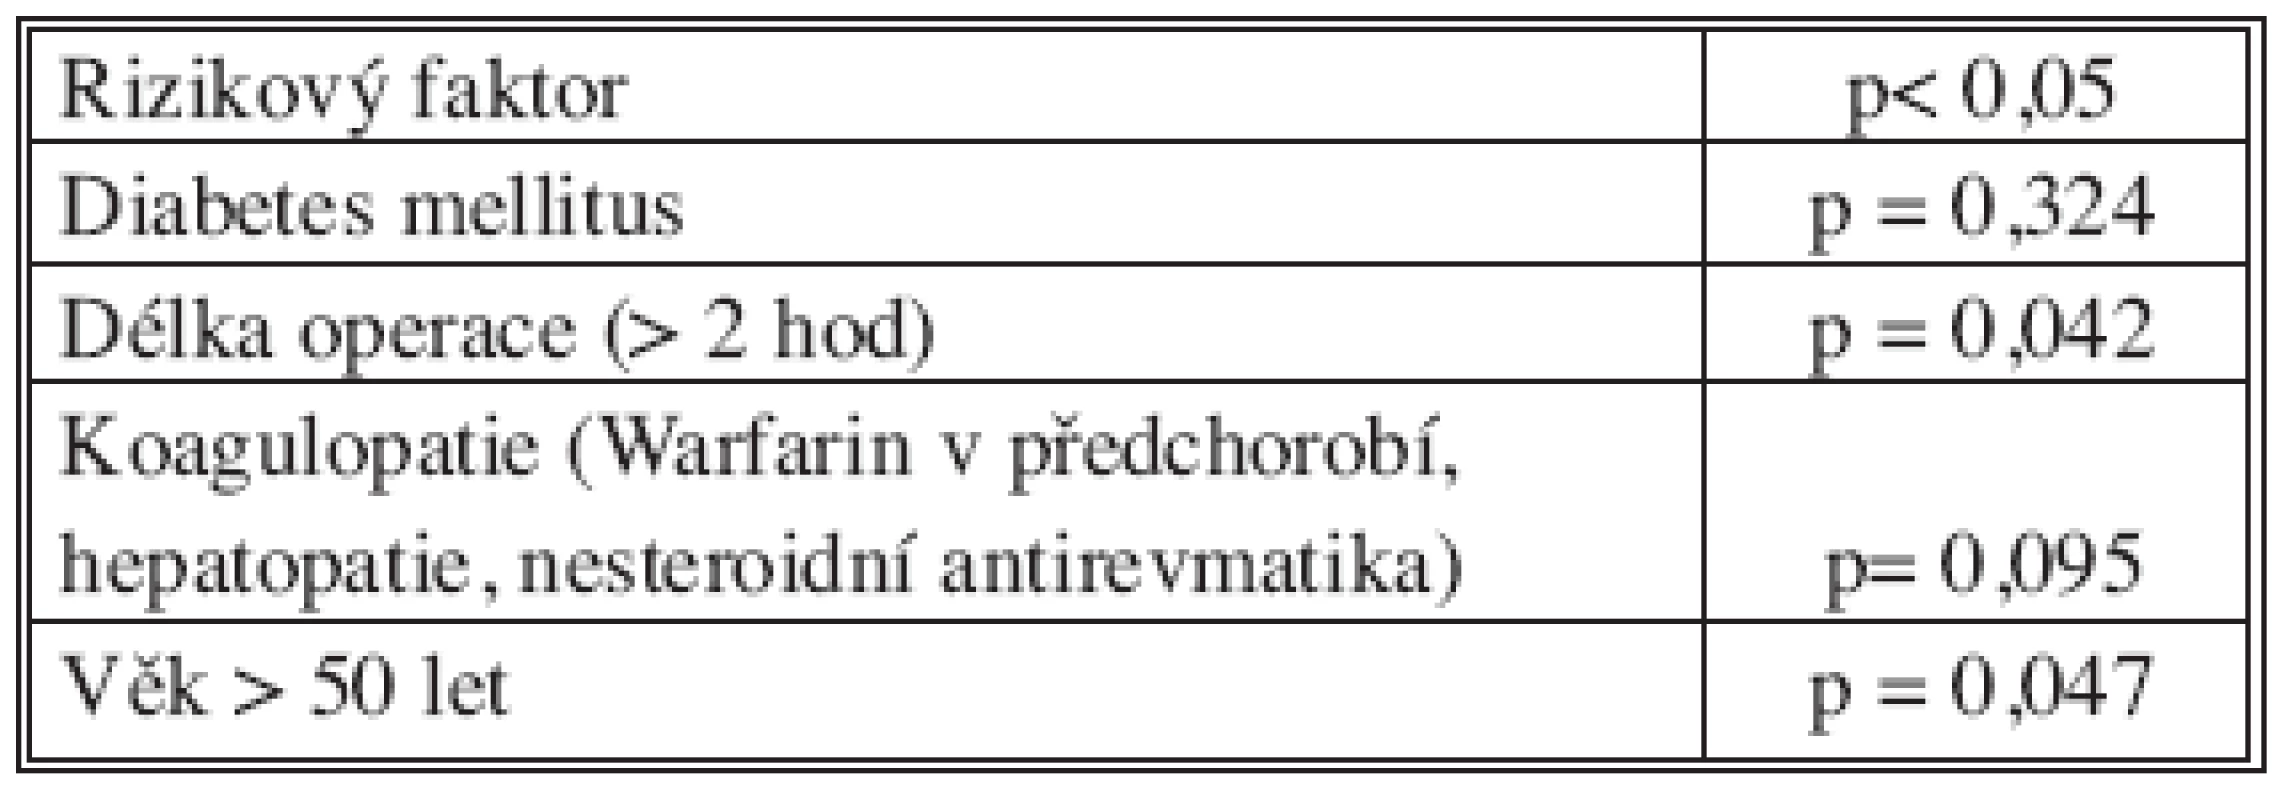 Rizikové faktory infekce chirurgického místa
Tab. 4. Surgical site infections risk factors